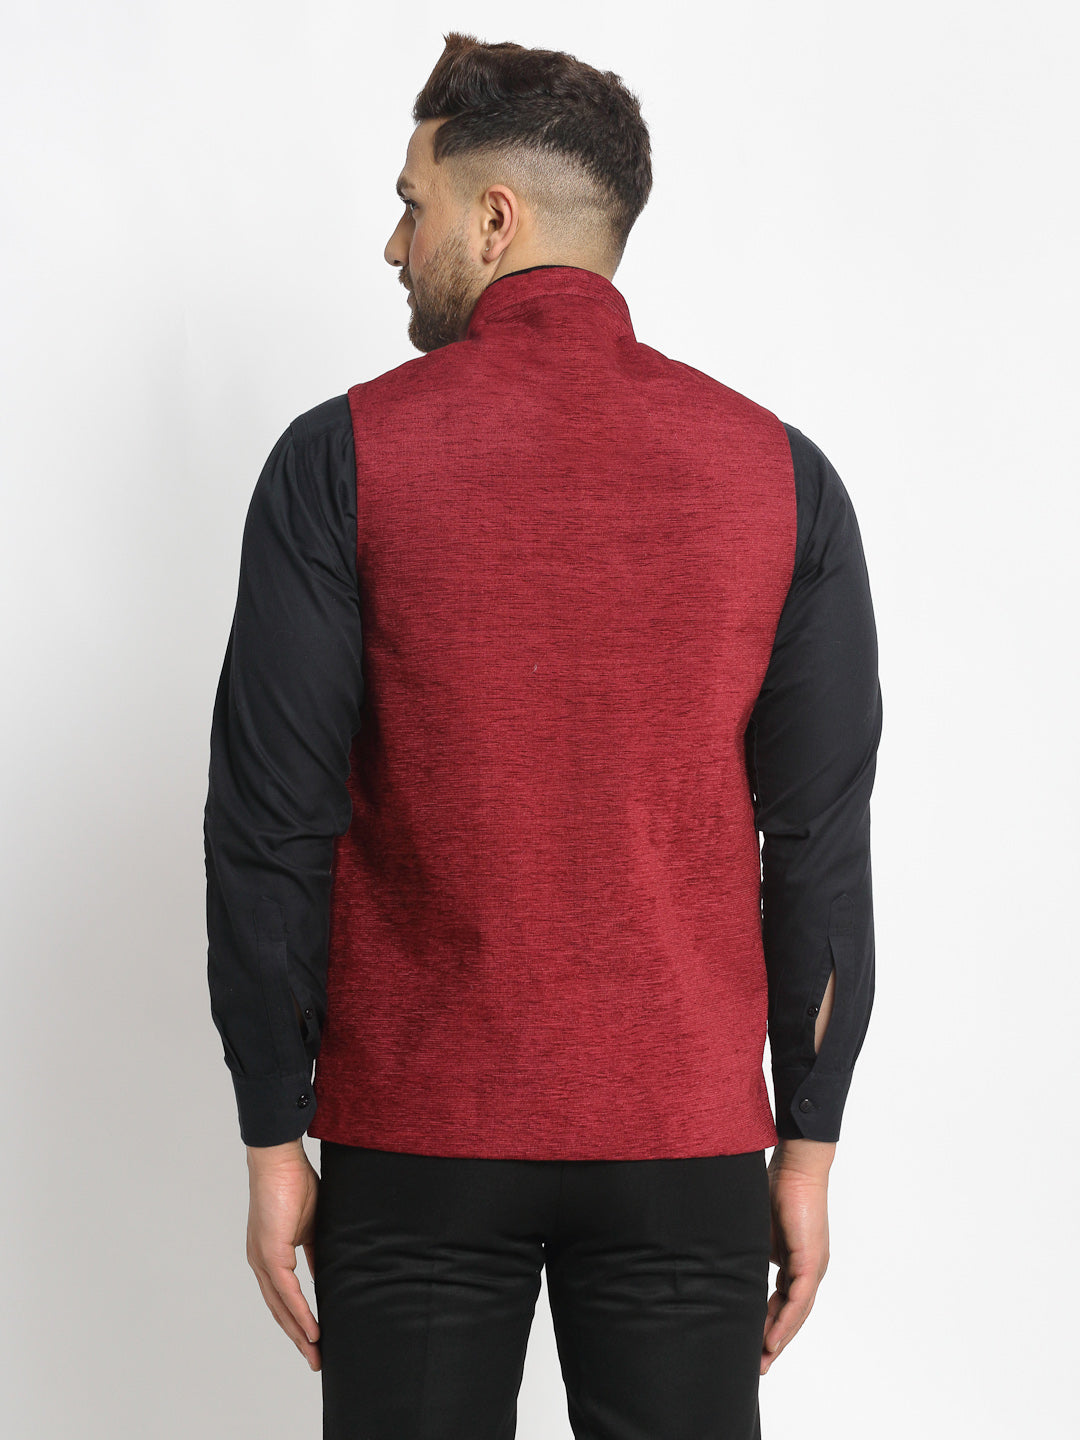 Jompers Men's Maroon Solid Nehru Jacket with Square Pocket